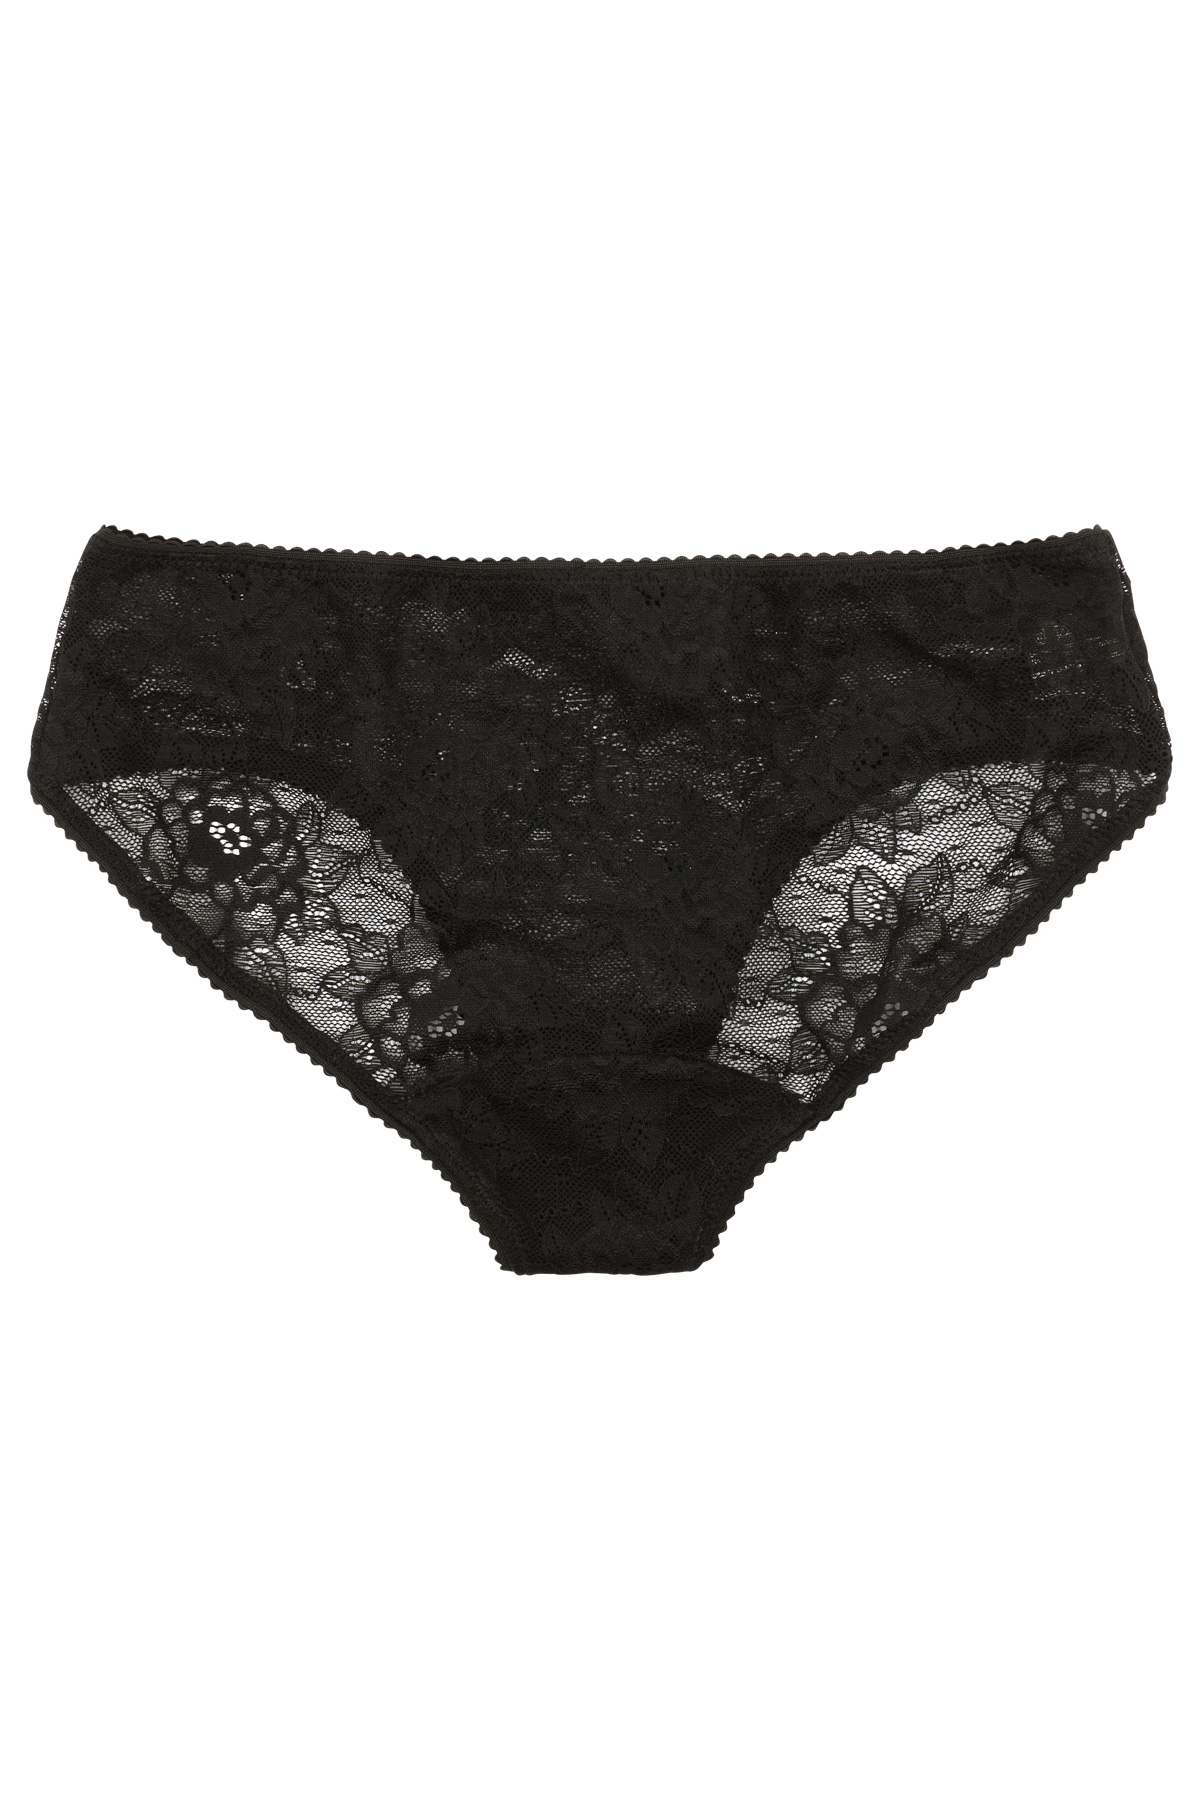 Black Lace panties low - Made by Noemi